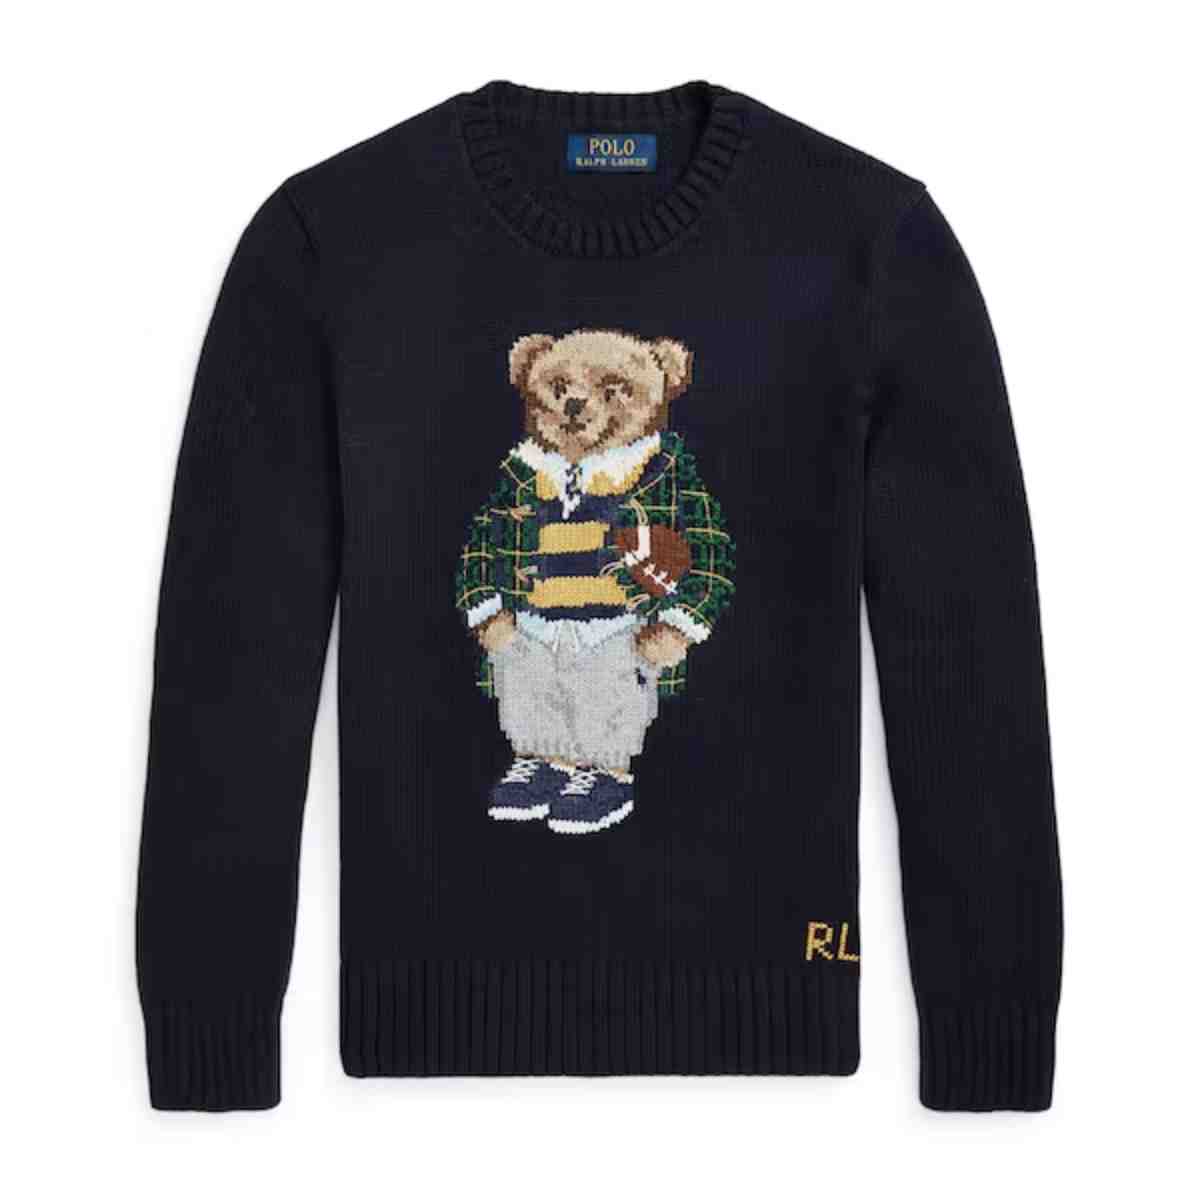 What is the polo ralph lauren bear 